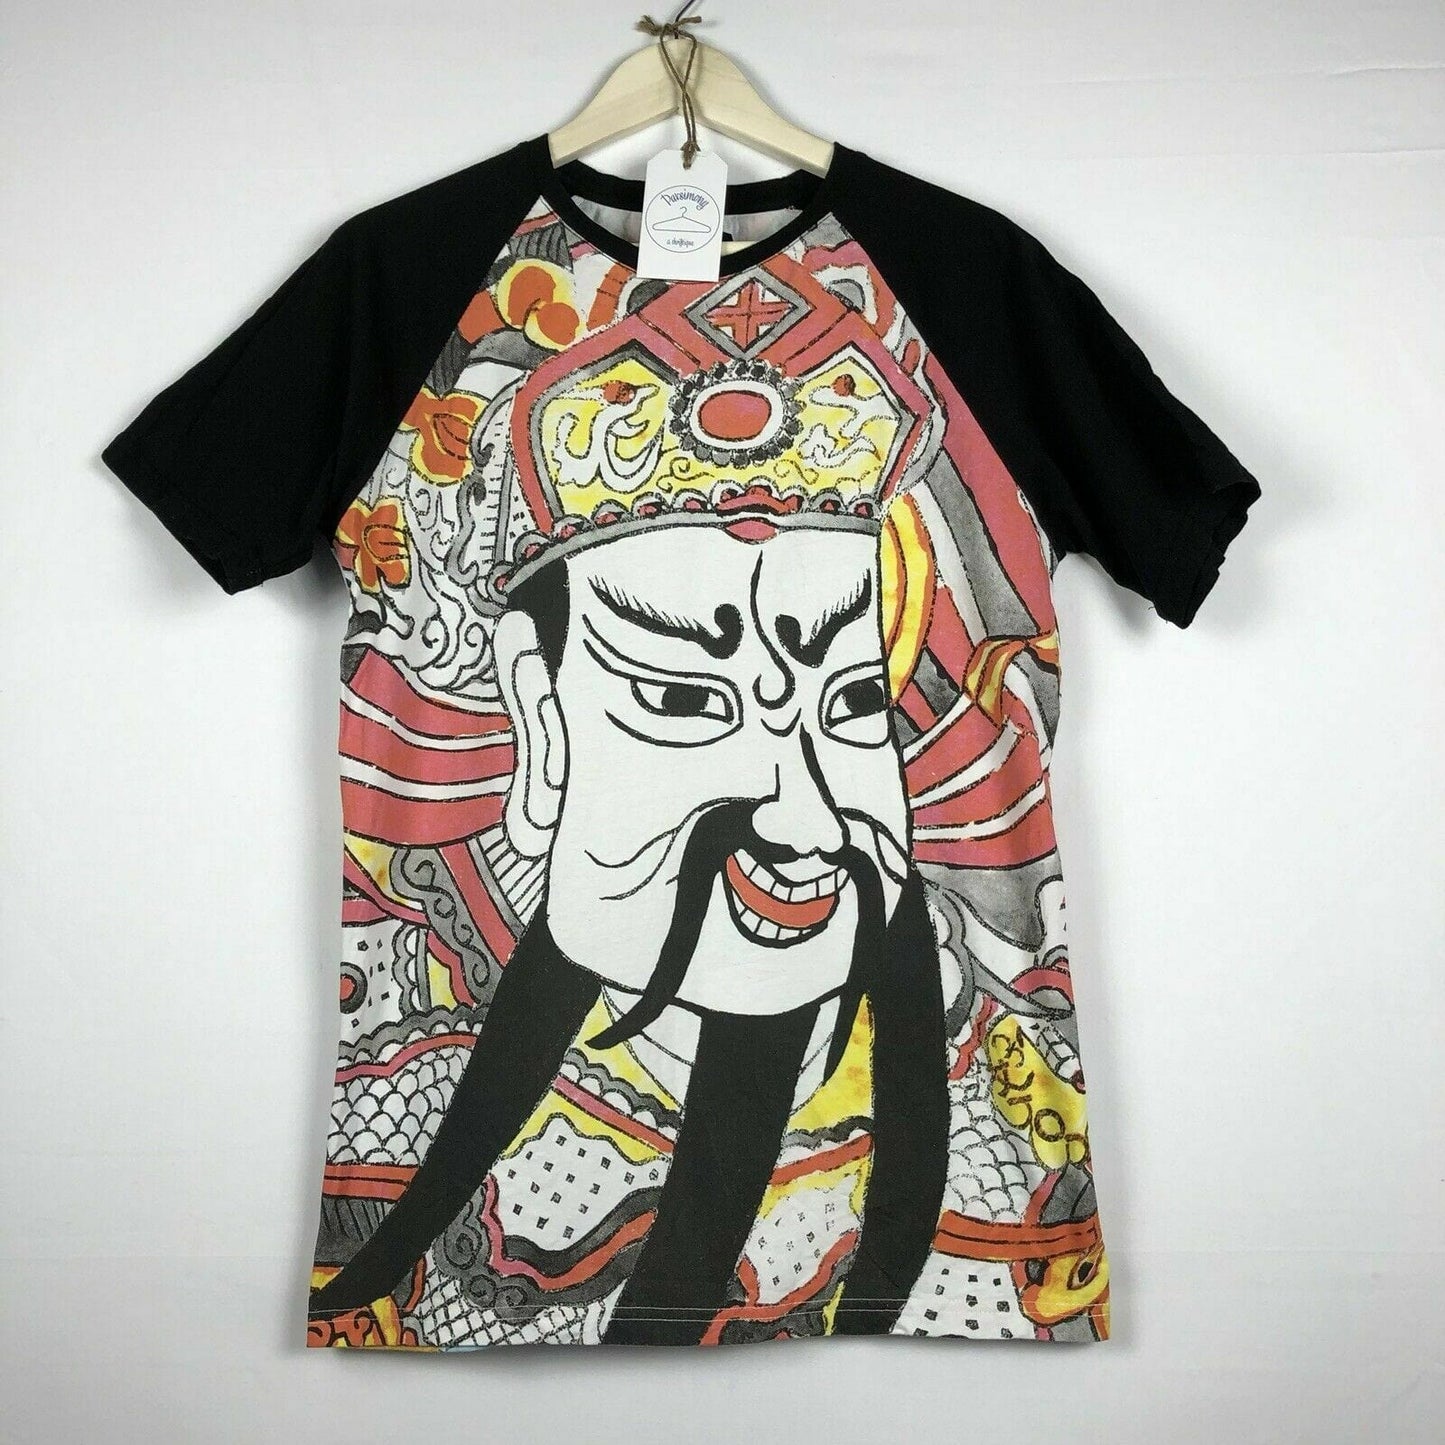 Stand out with this GOD Shogun Black Graphic T-Shirt - Mens Size M.